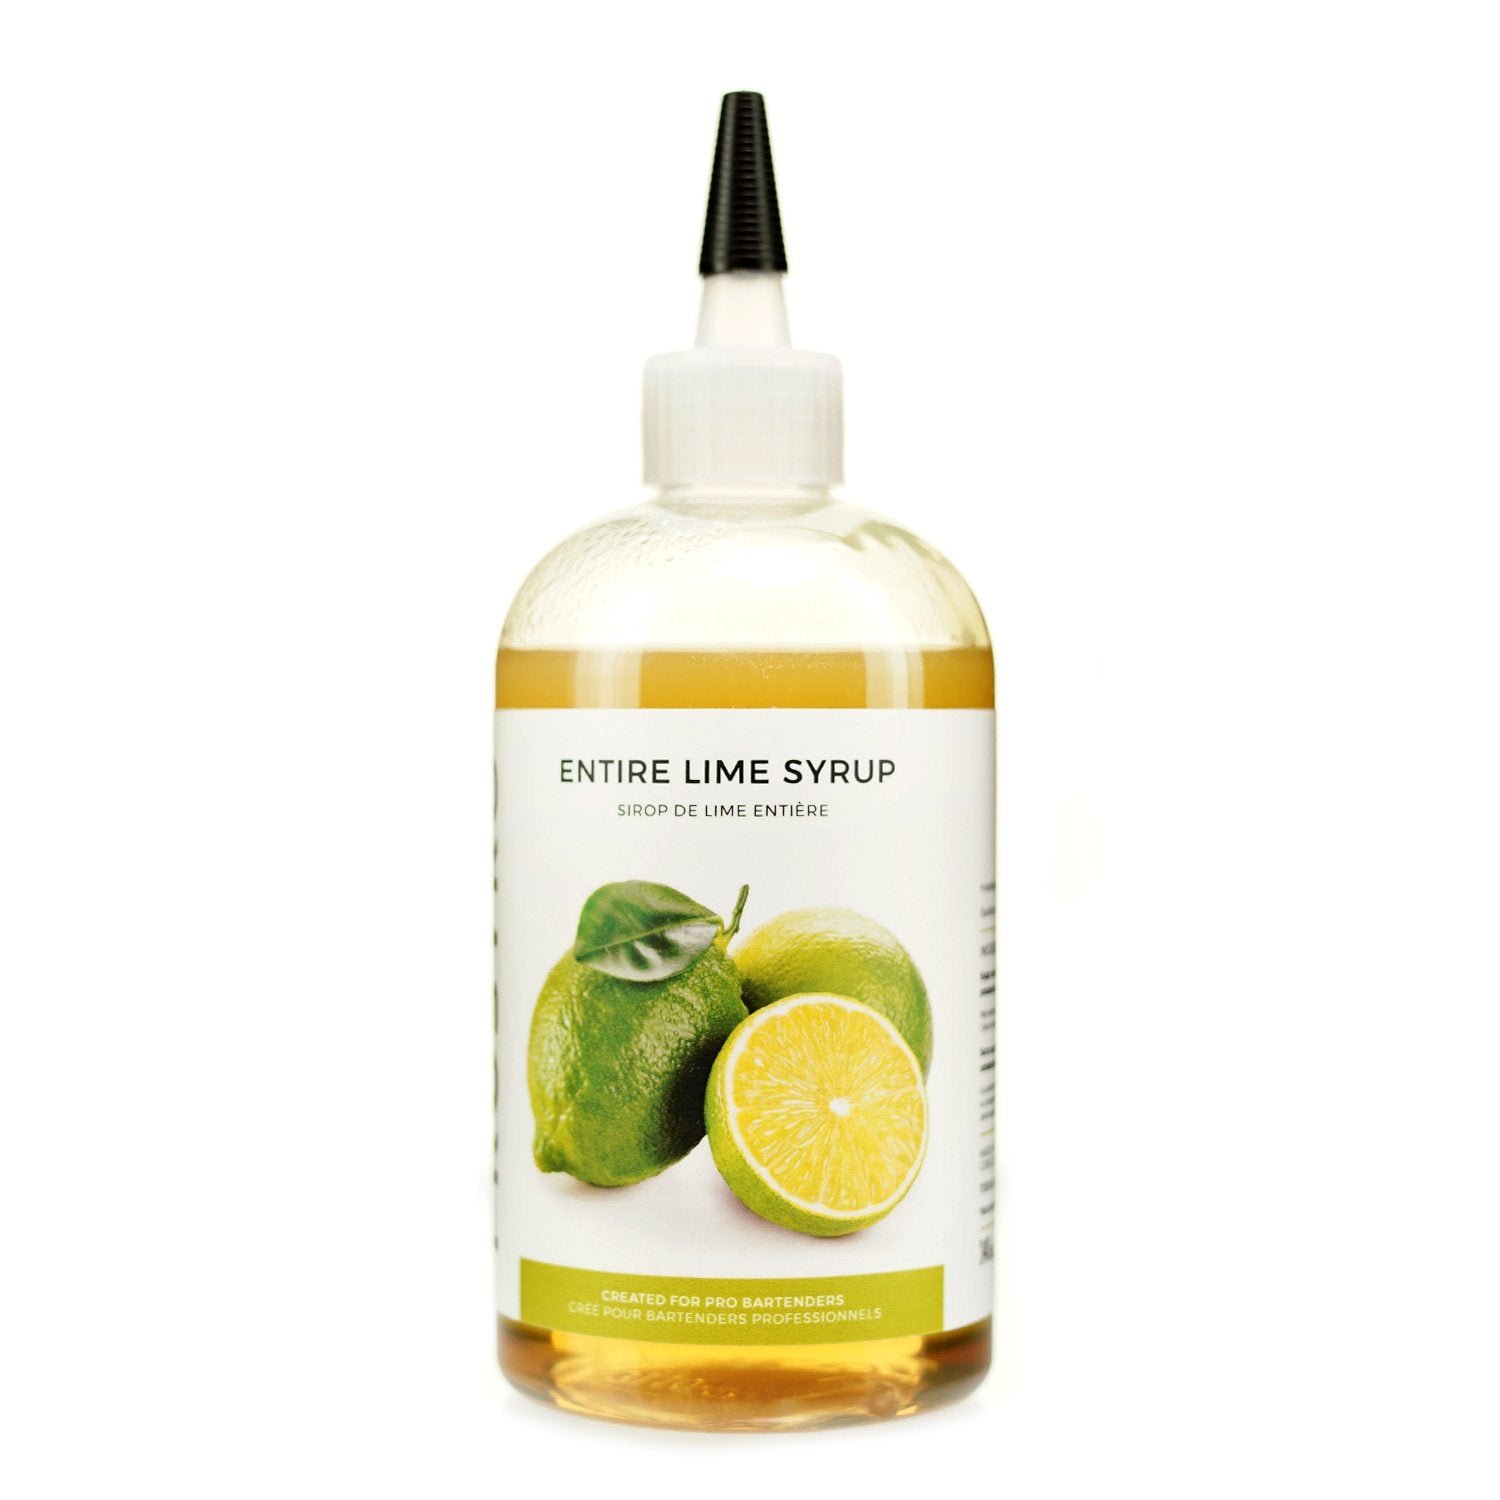 prosyro-syrups-home-prosyro-entire-lime-340ml-alambika-montreal-canada-28166757646387.jpg